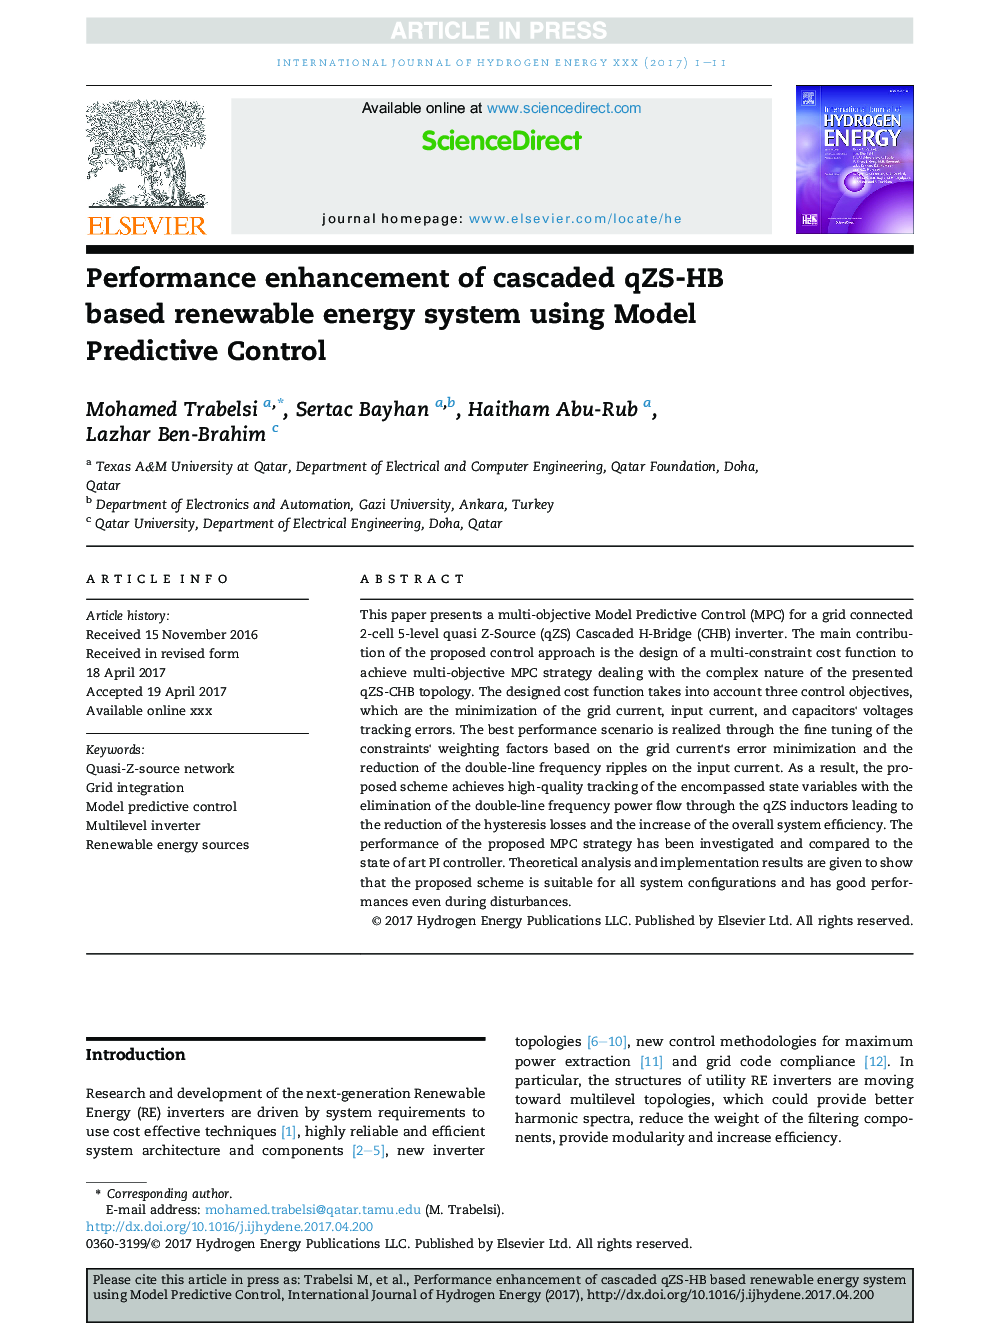 Performance enhancement of cascaded qZS-HB based renewable energy system using Model Predictive Control